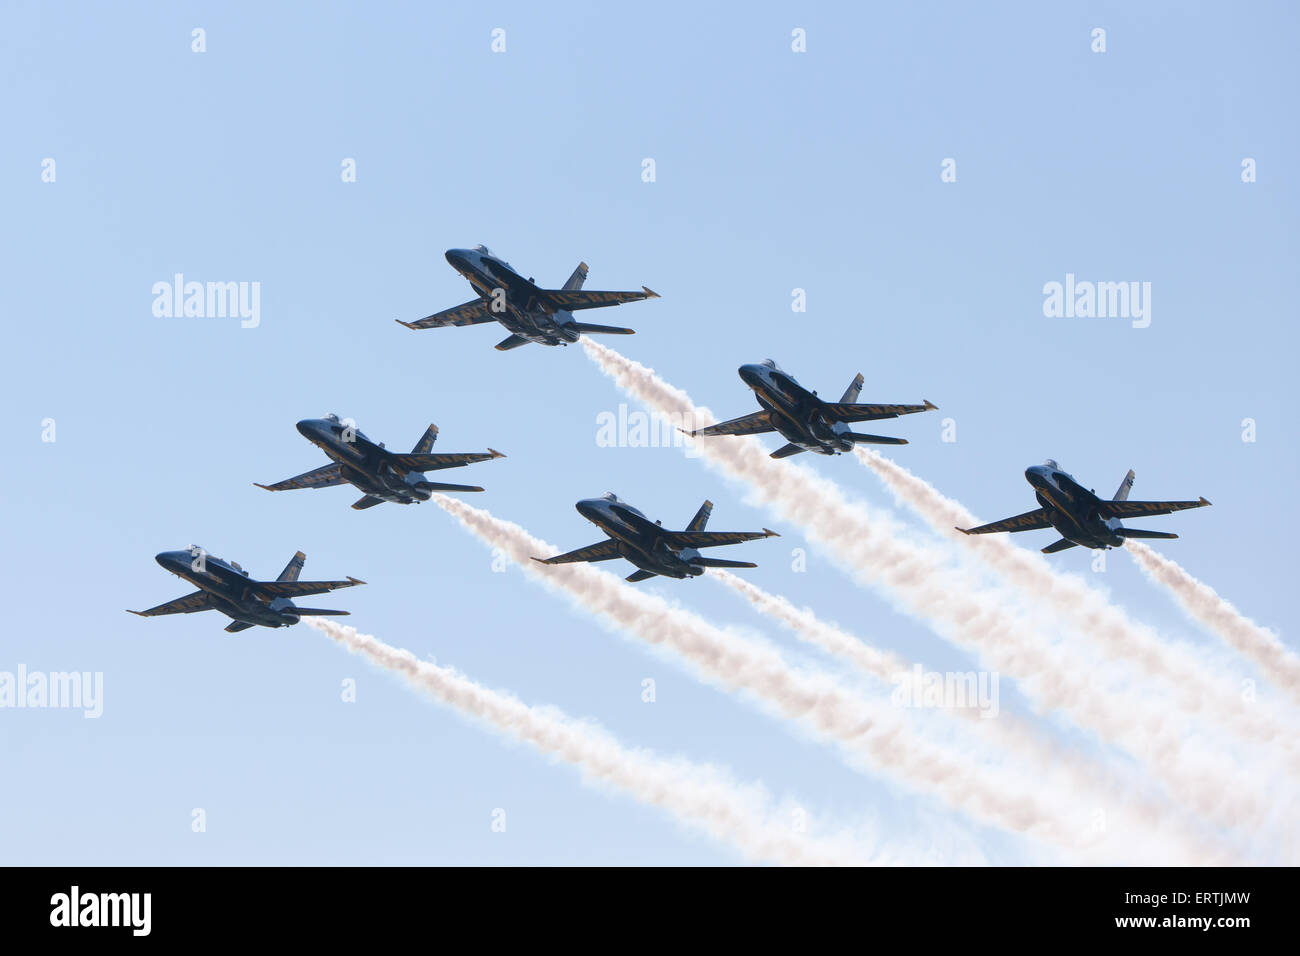 The Blue Angels flight demonstration squadron flyover prior to the 2015 US Naval Academy Graduation and Commissioning ceremony in Annapolis, Maryland. Stock Photo